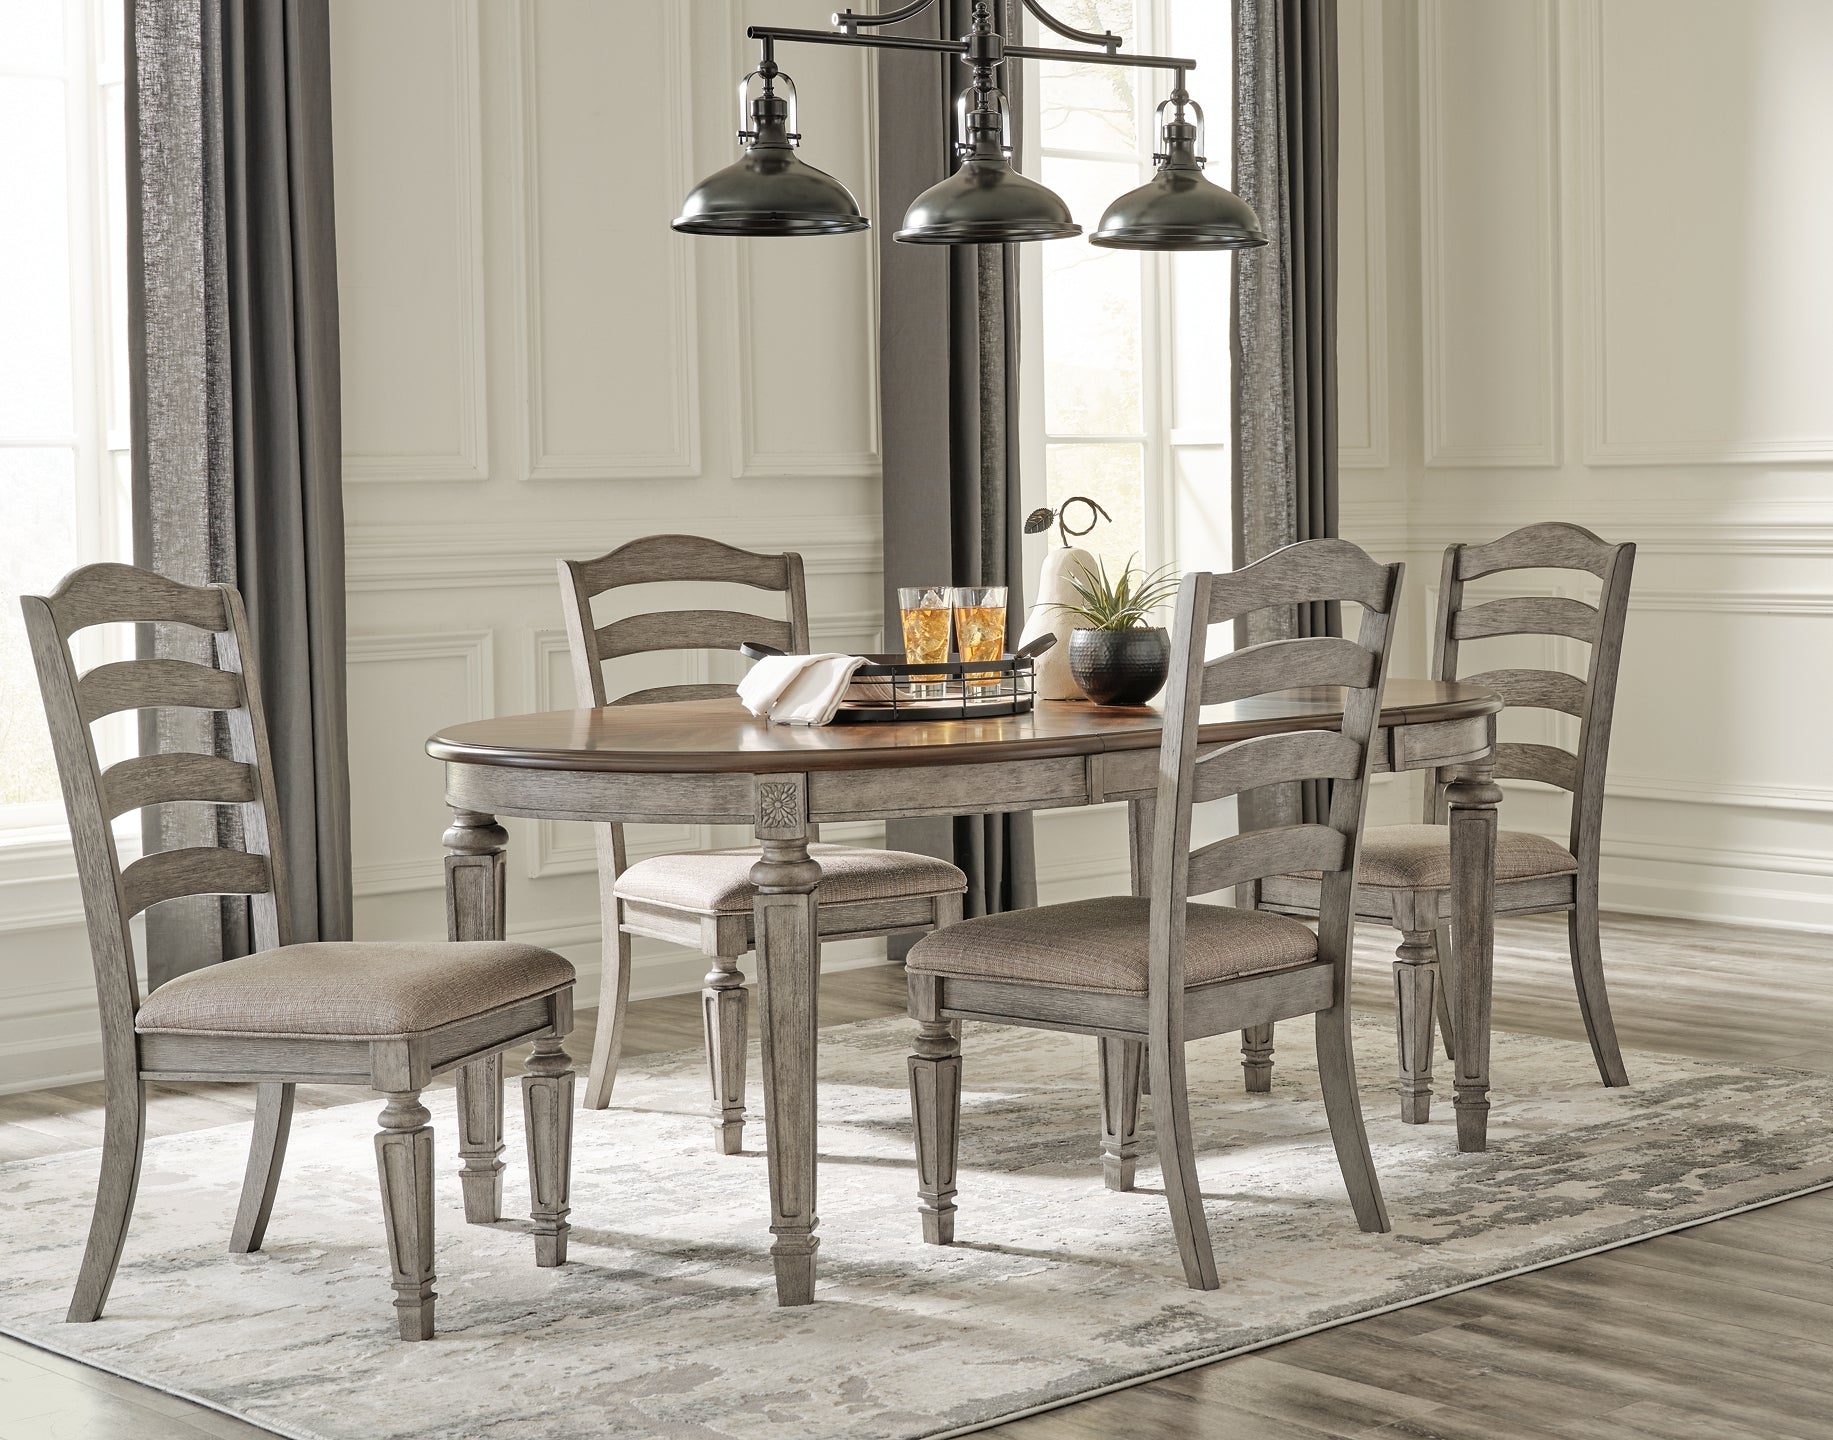 Lodenbay Dining Table and 4 Chairs at Walker Mattress and Furniture Locations in Cedar Park and Belton TX.